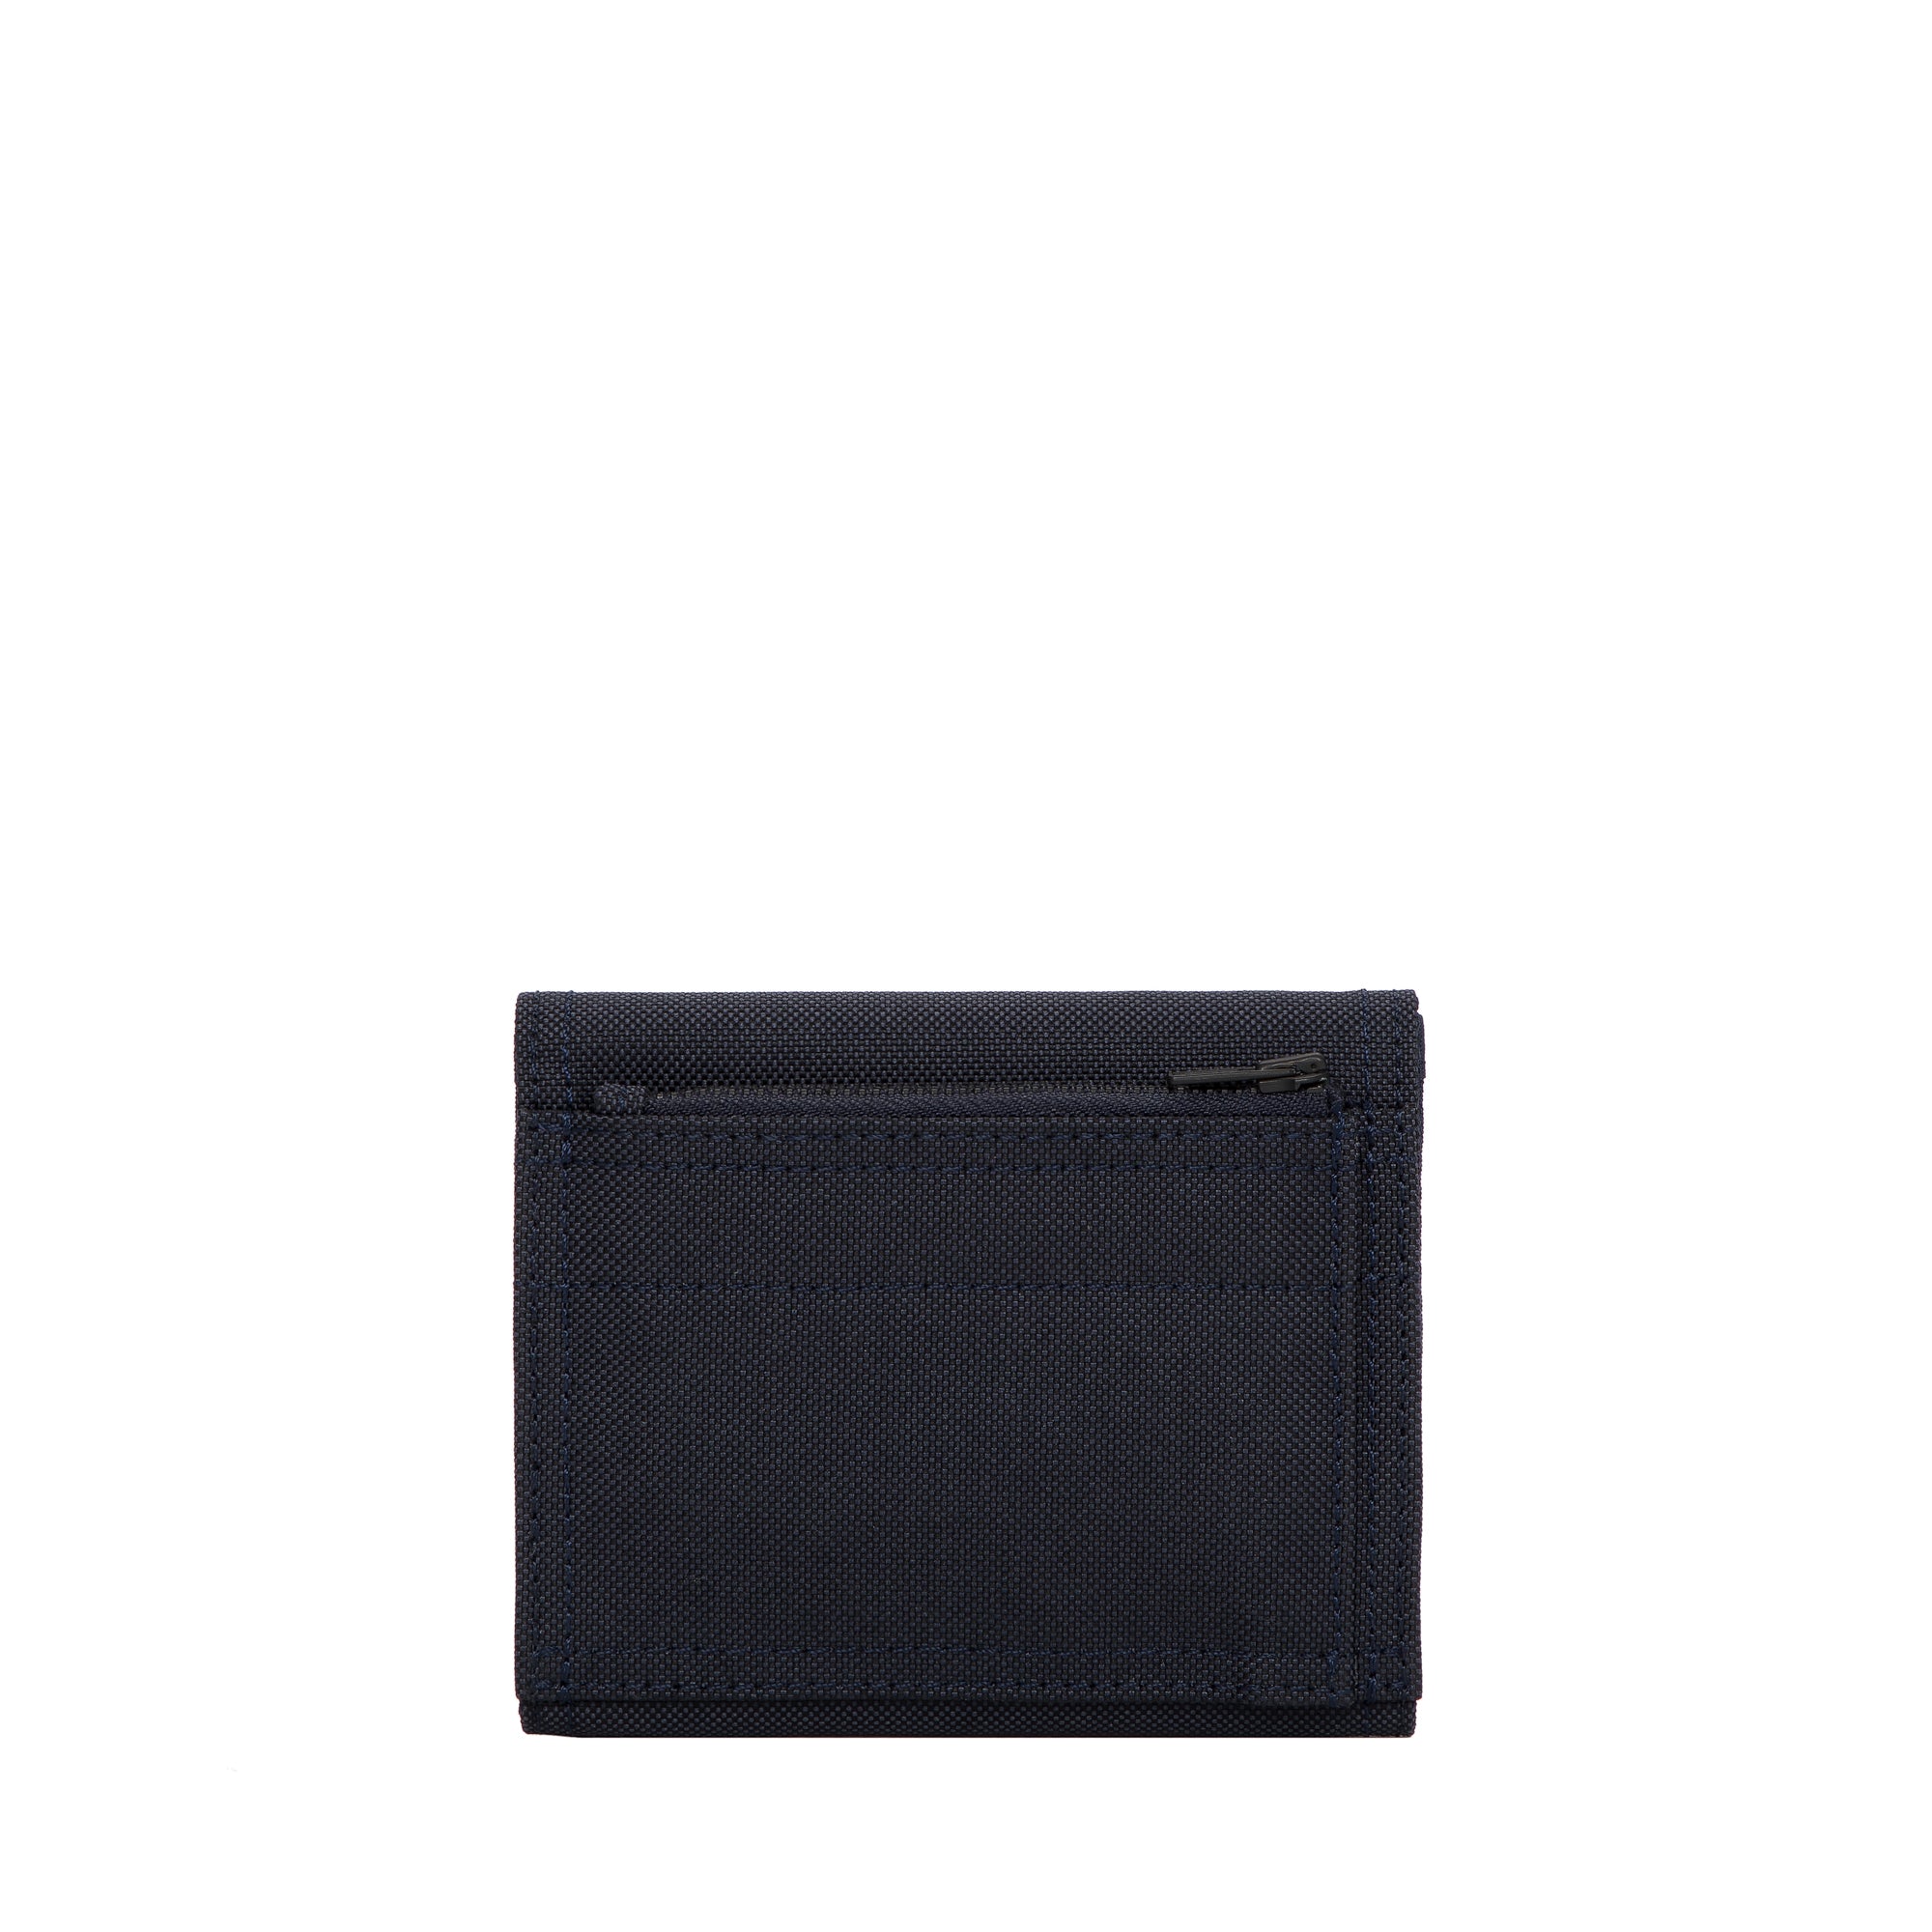 TOUGH JEANSMITH Moment short polyester wallet #TW123-003A